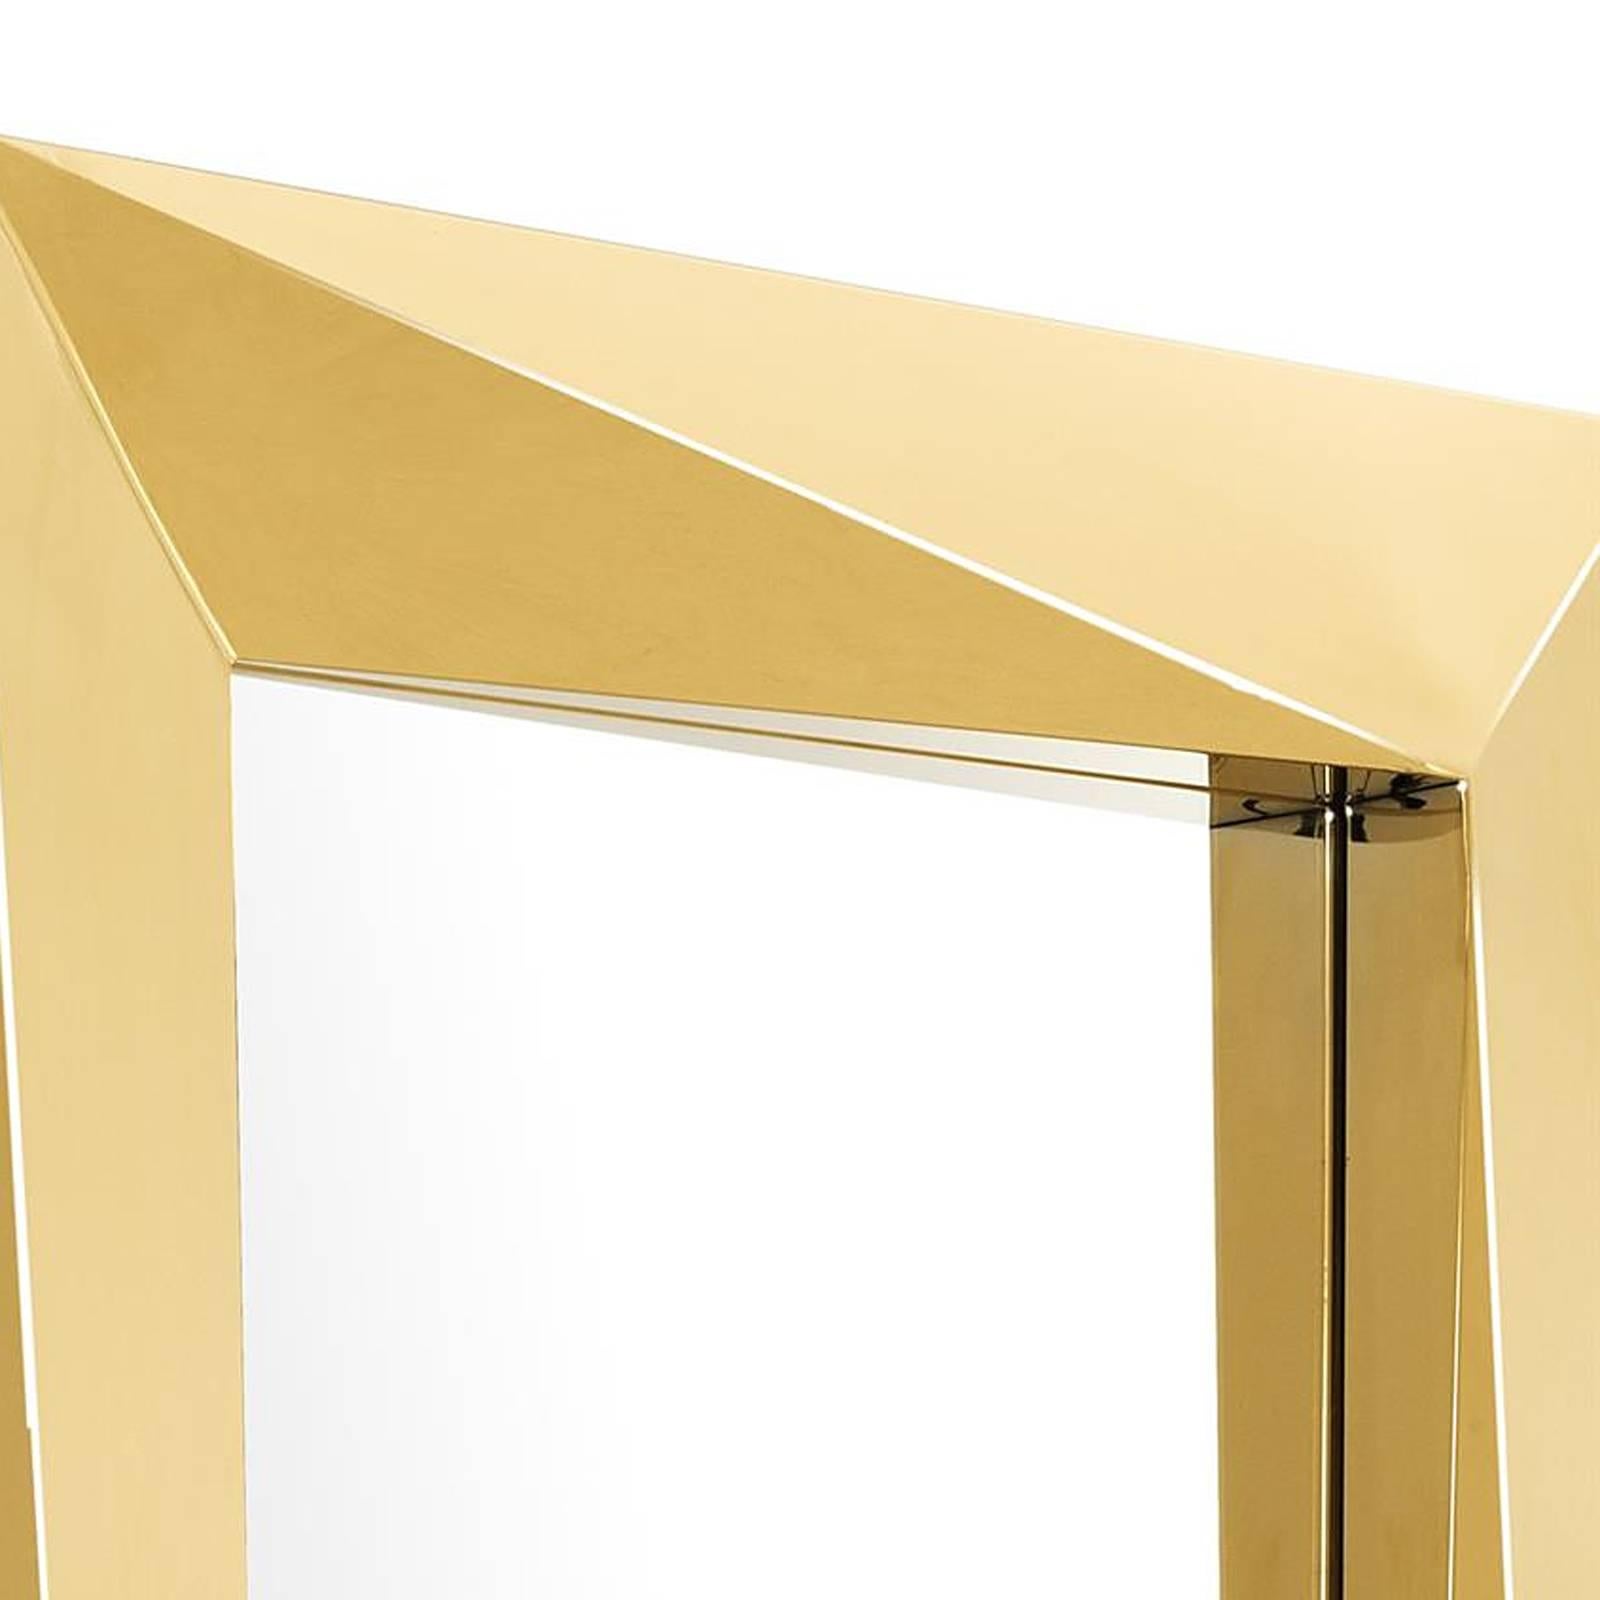 Dutch Axis Mirror in Gold Finish or in Polished Stainless Steel